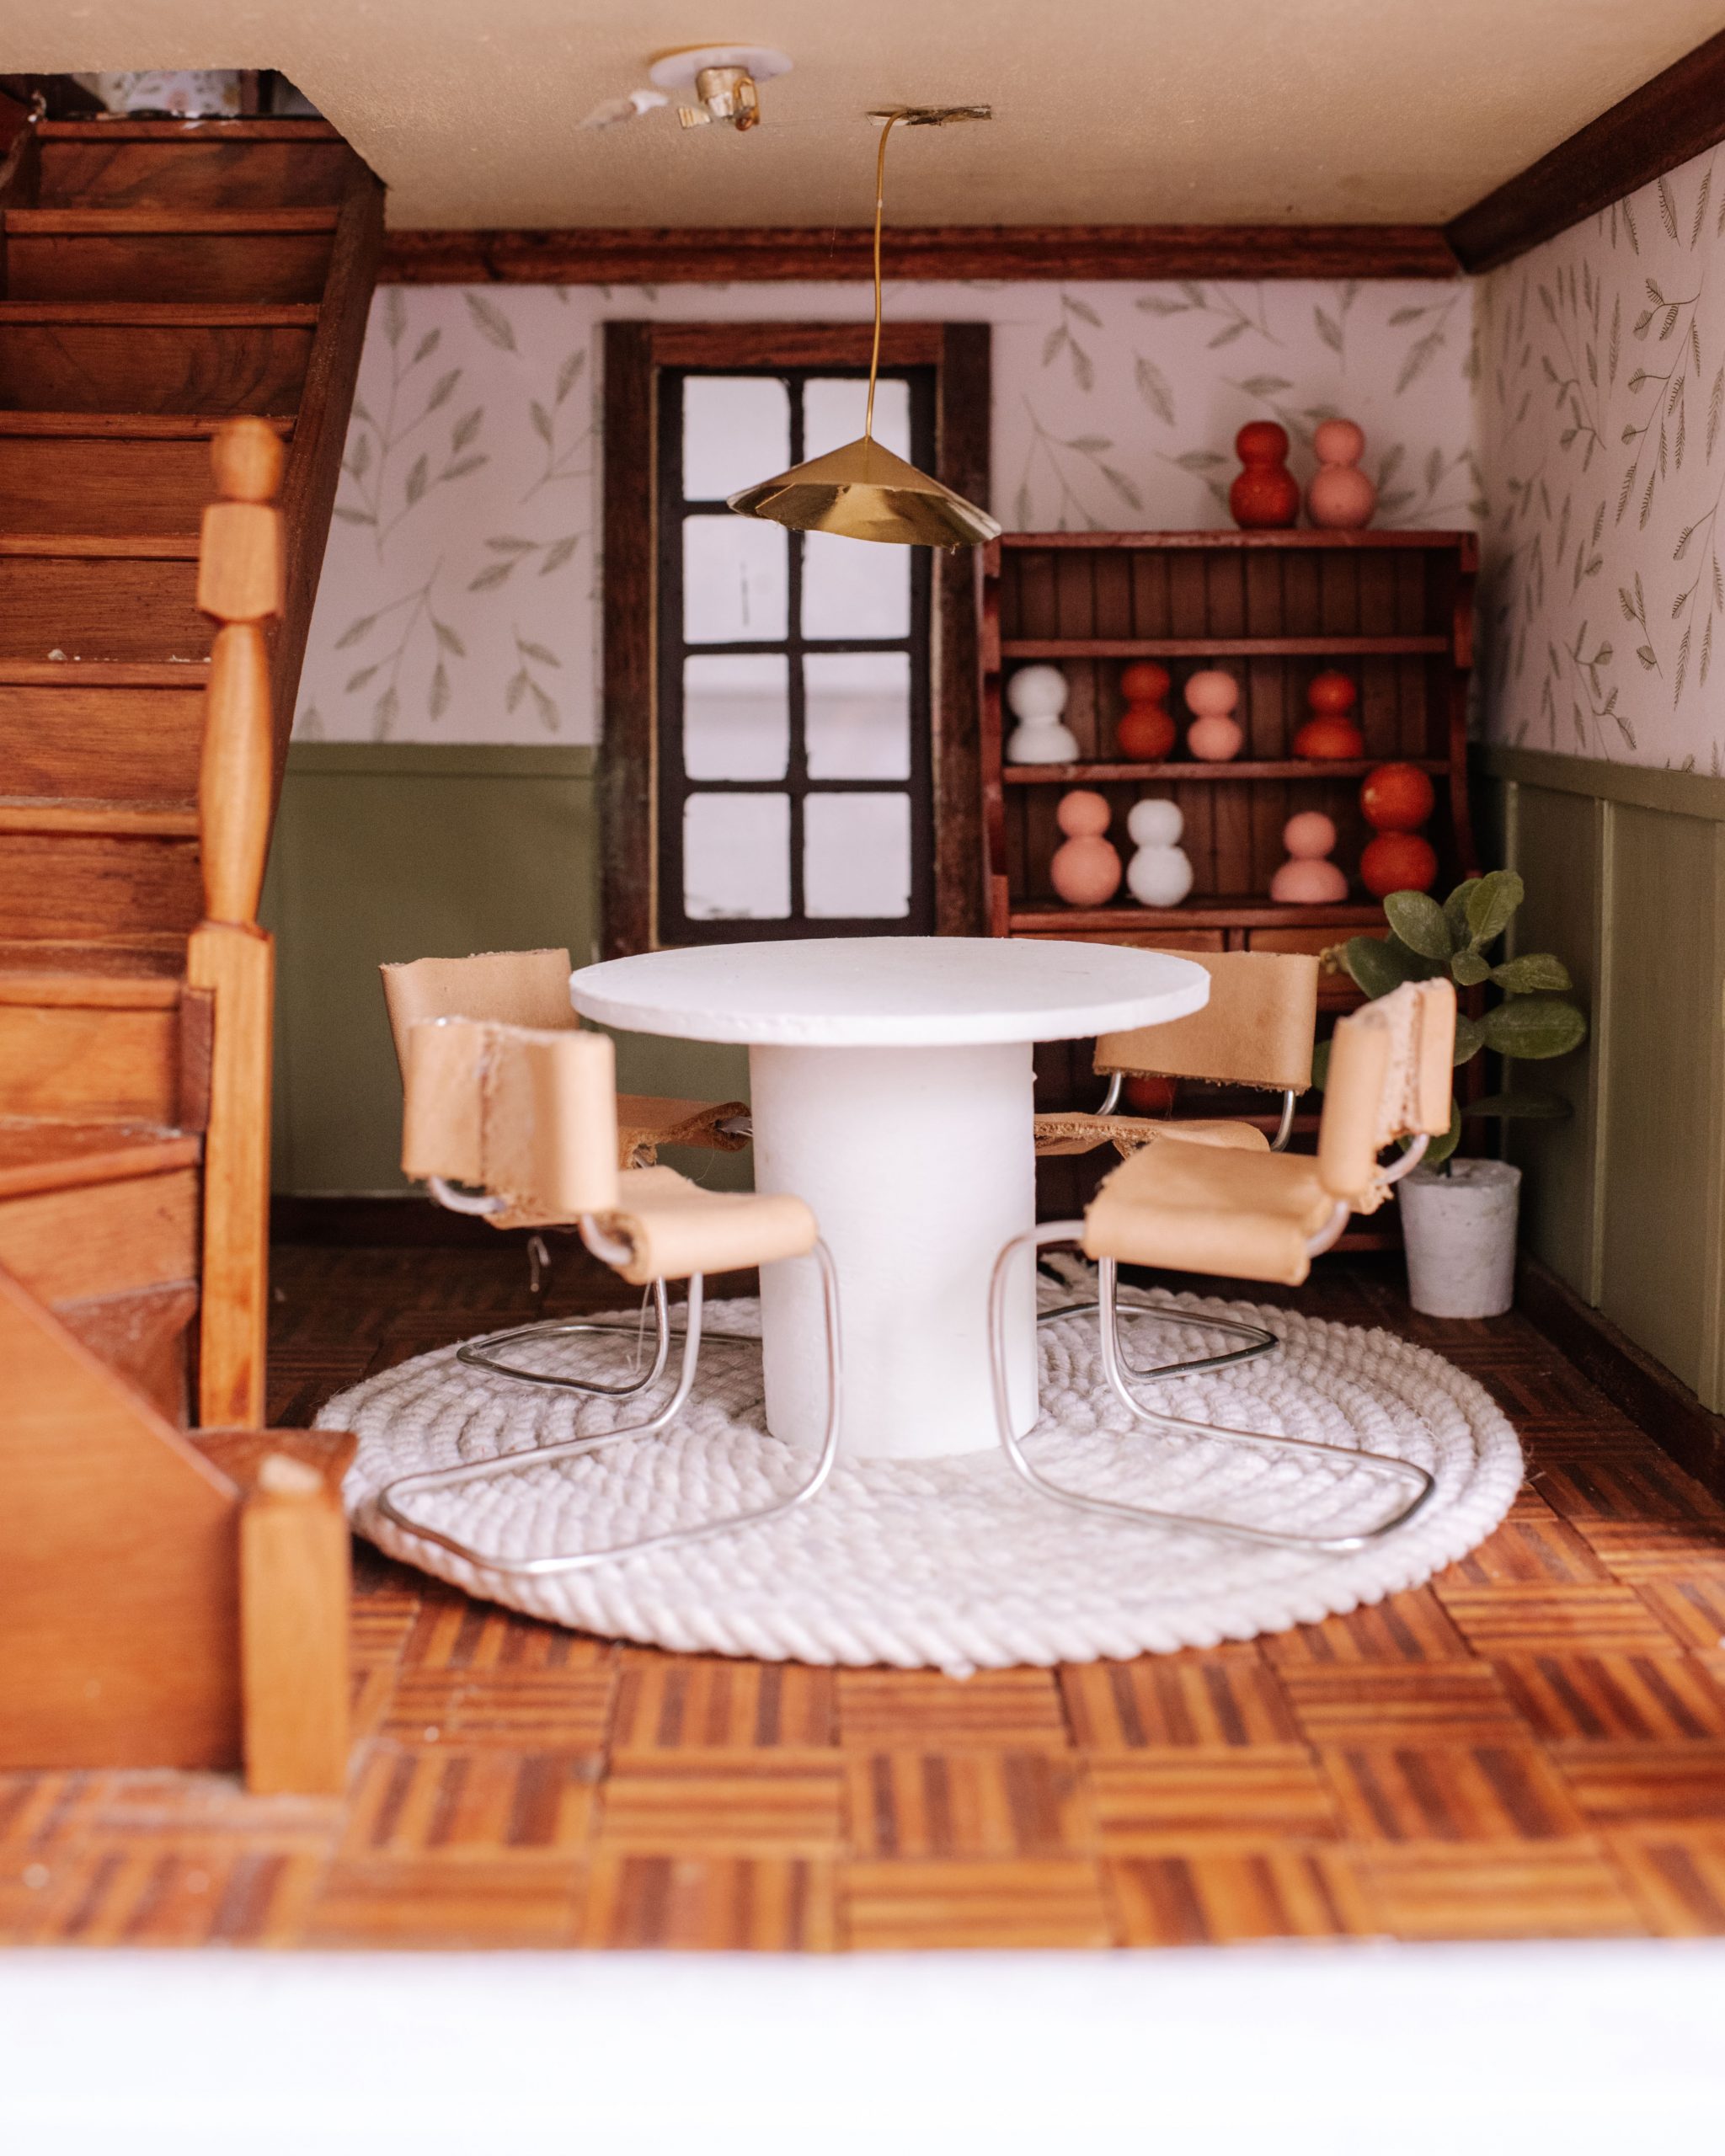 Image of a miniature dollhouse dining set. The table is a white round table made from a coaster and cardboard tube from a wrapping paper roll. The chairs have a metal frame and leather seats.